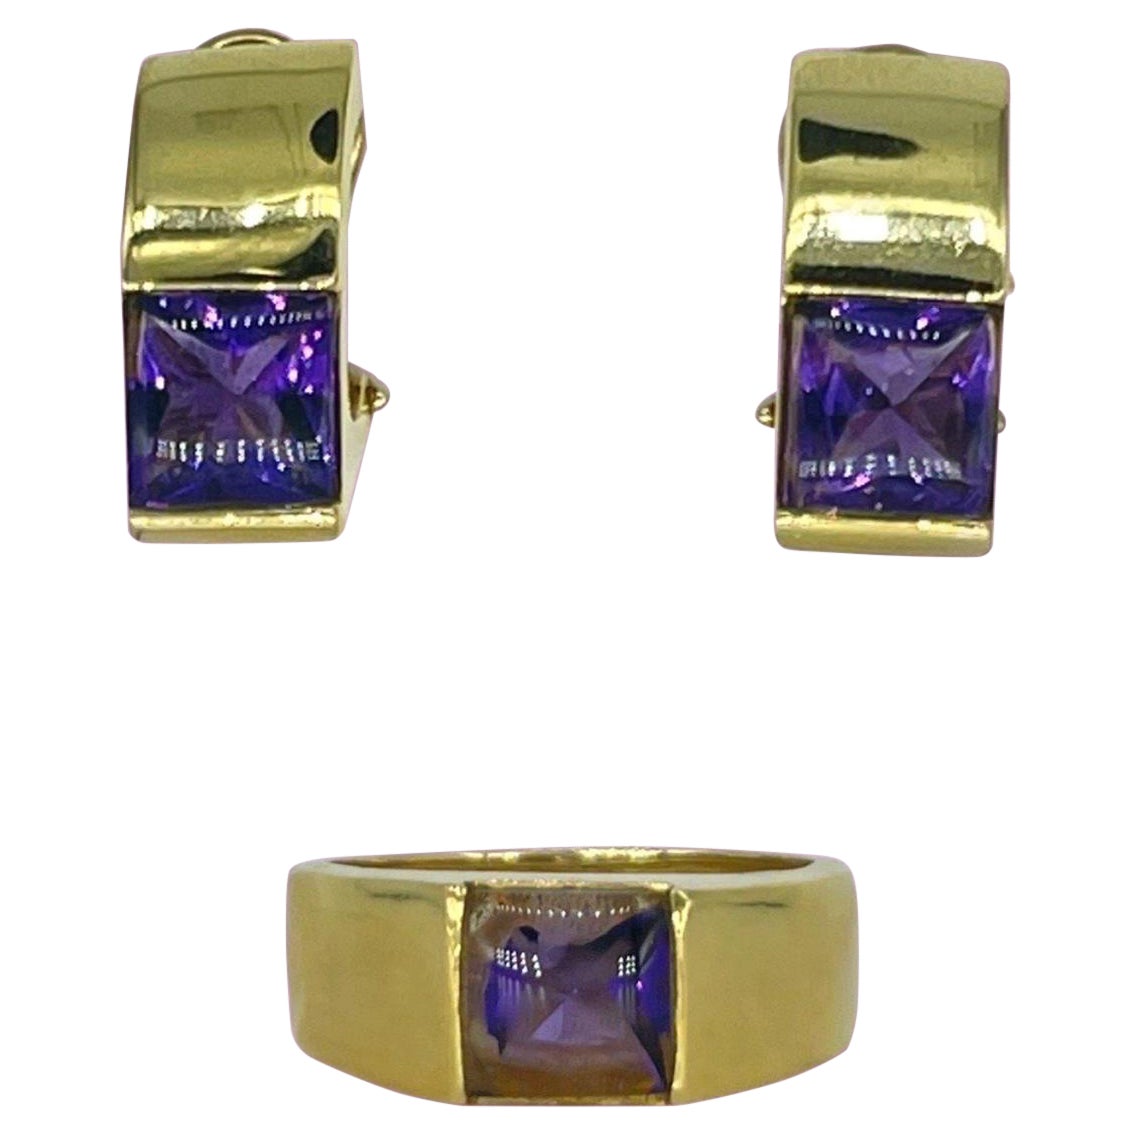 Vintage Rare Squared Cabochon Cut Amethyst Gemstone Earrings and Ring Set 18k  For Sale